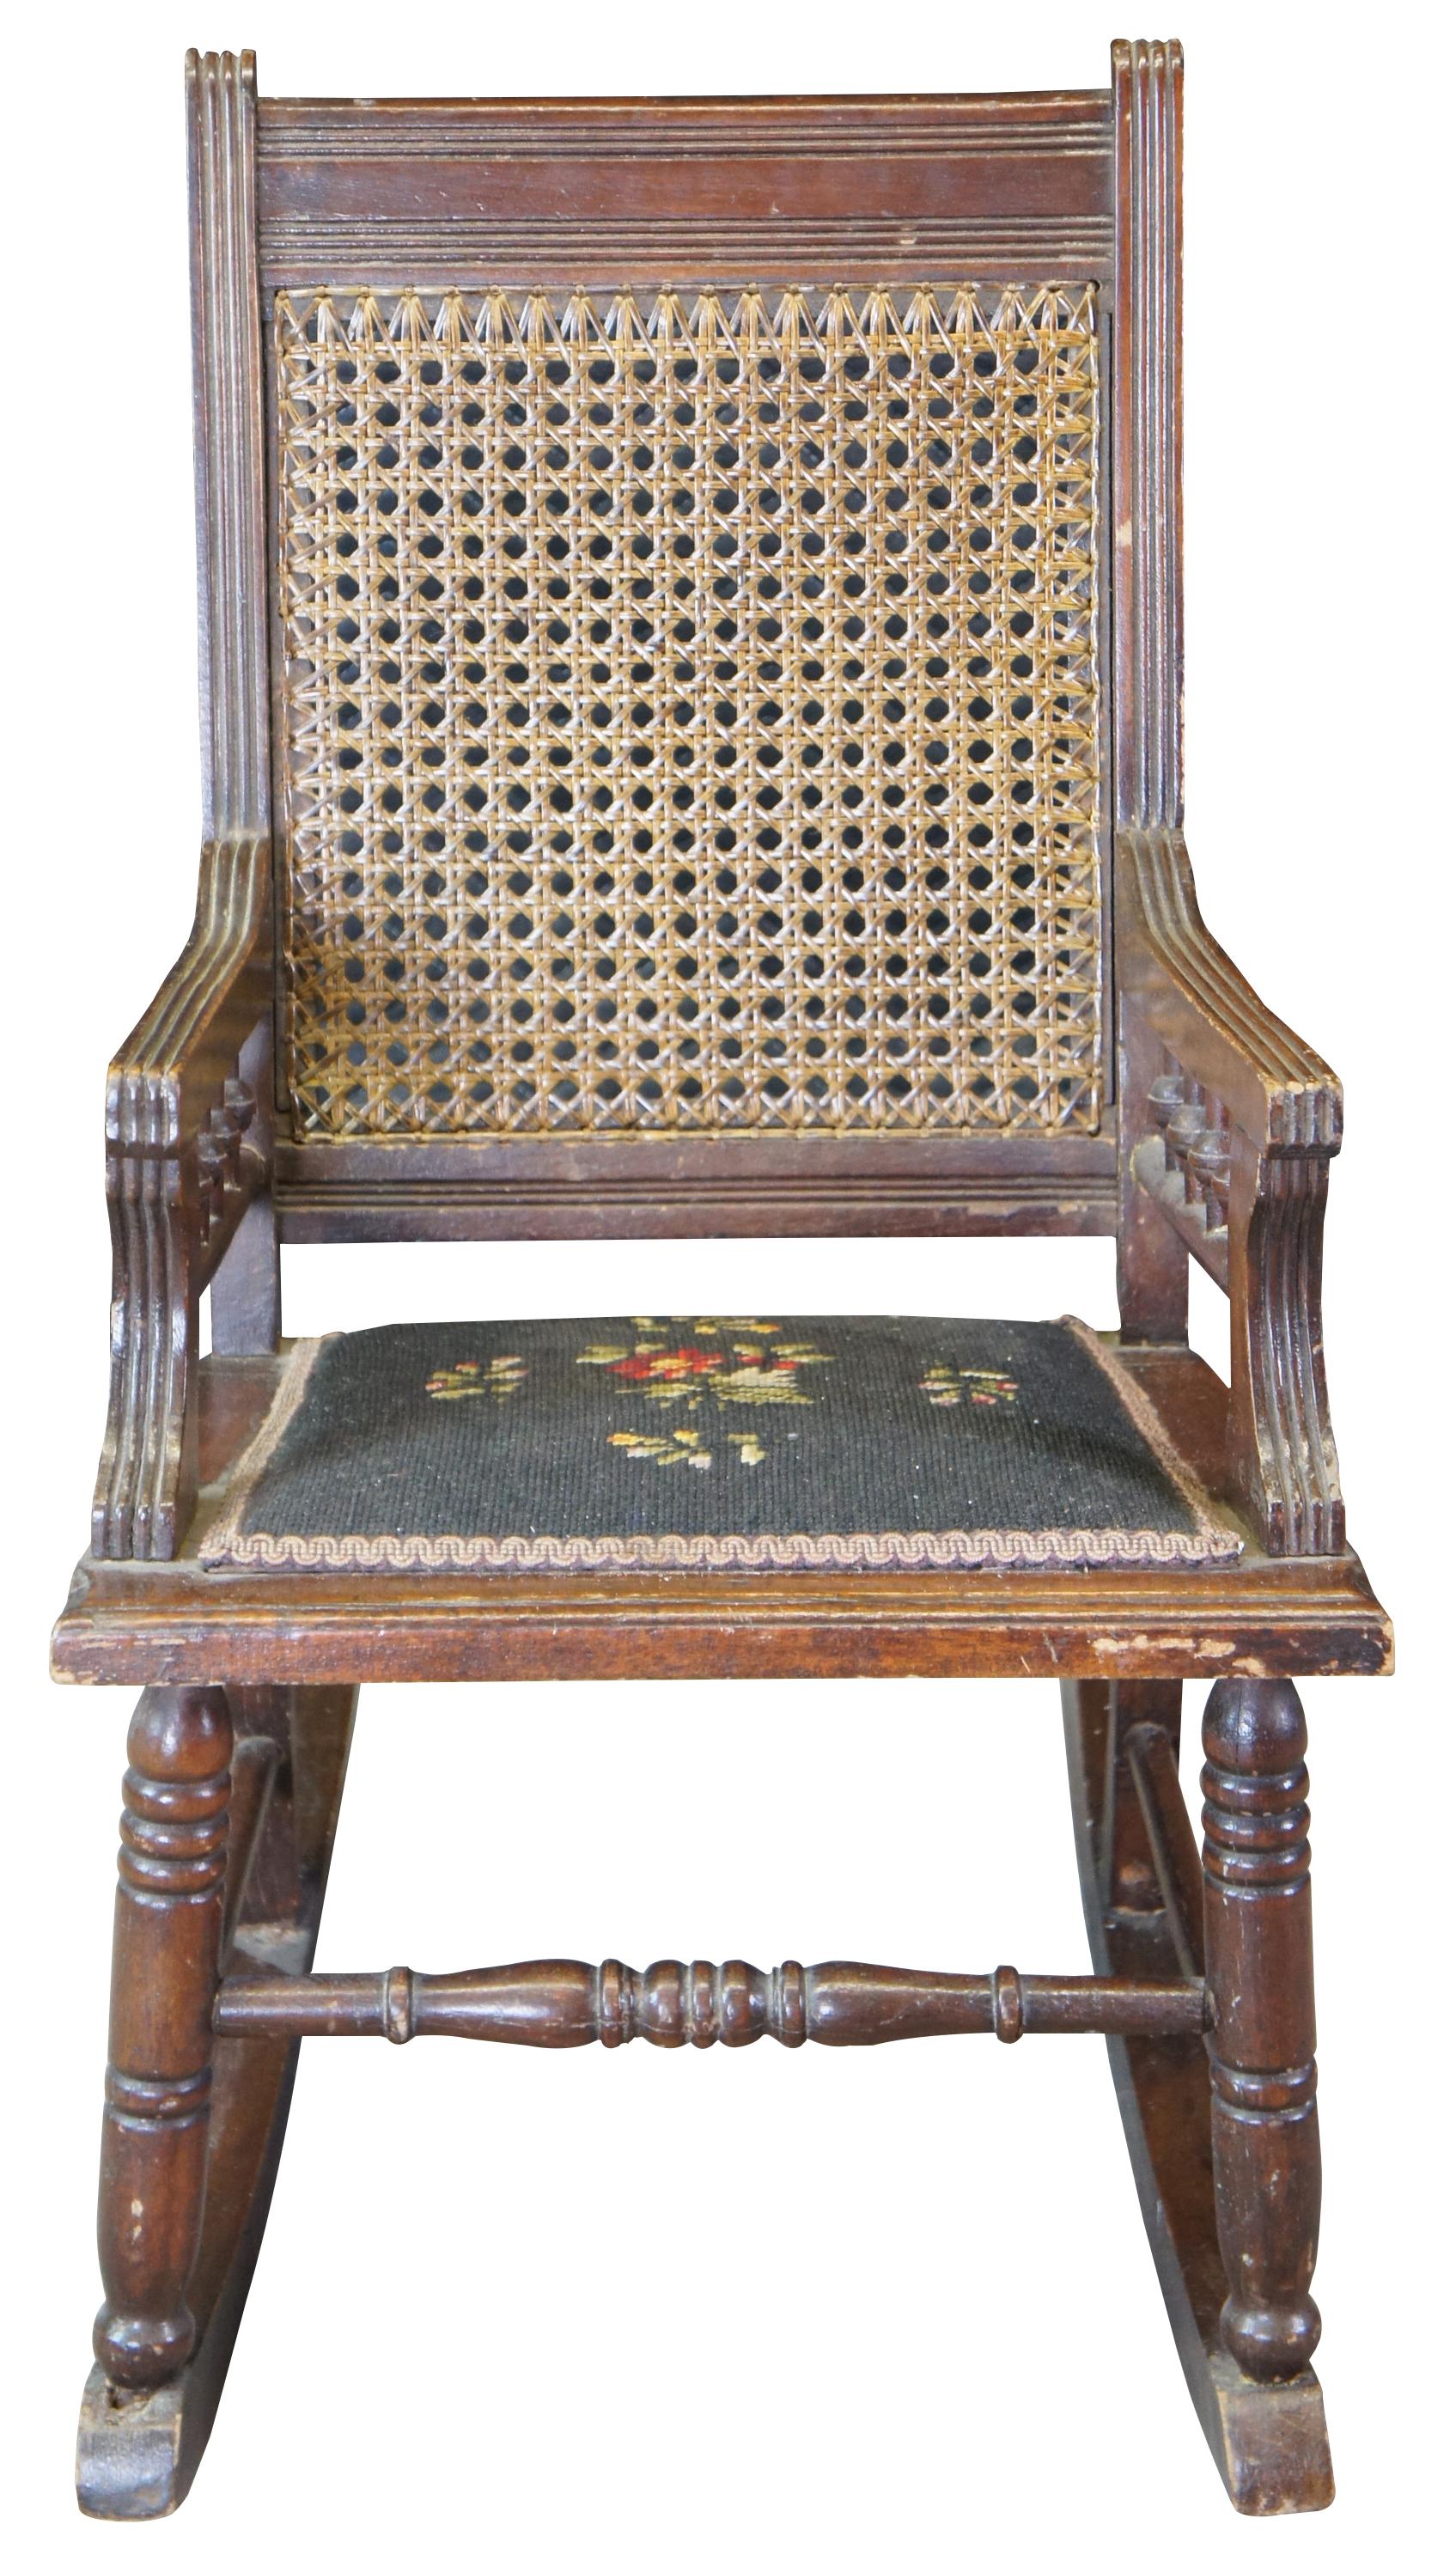 Antique Victorian Eastlake childs rocker featuring caned and needlepoint design with turned and fluted accents.
 